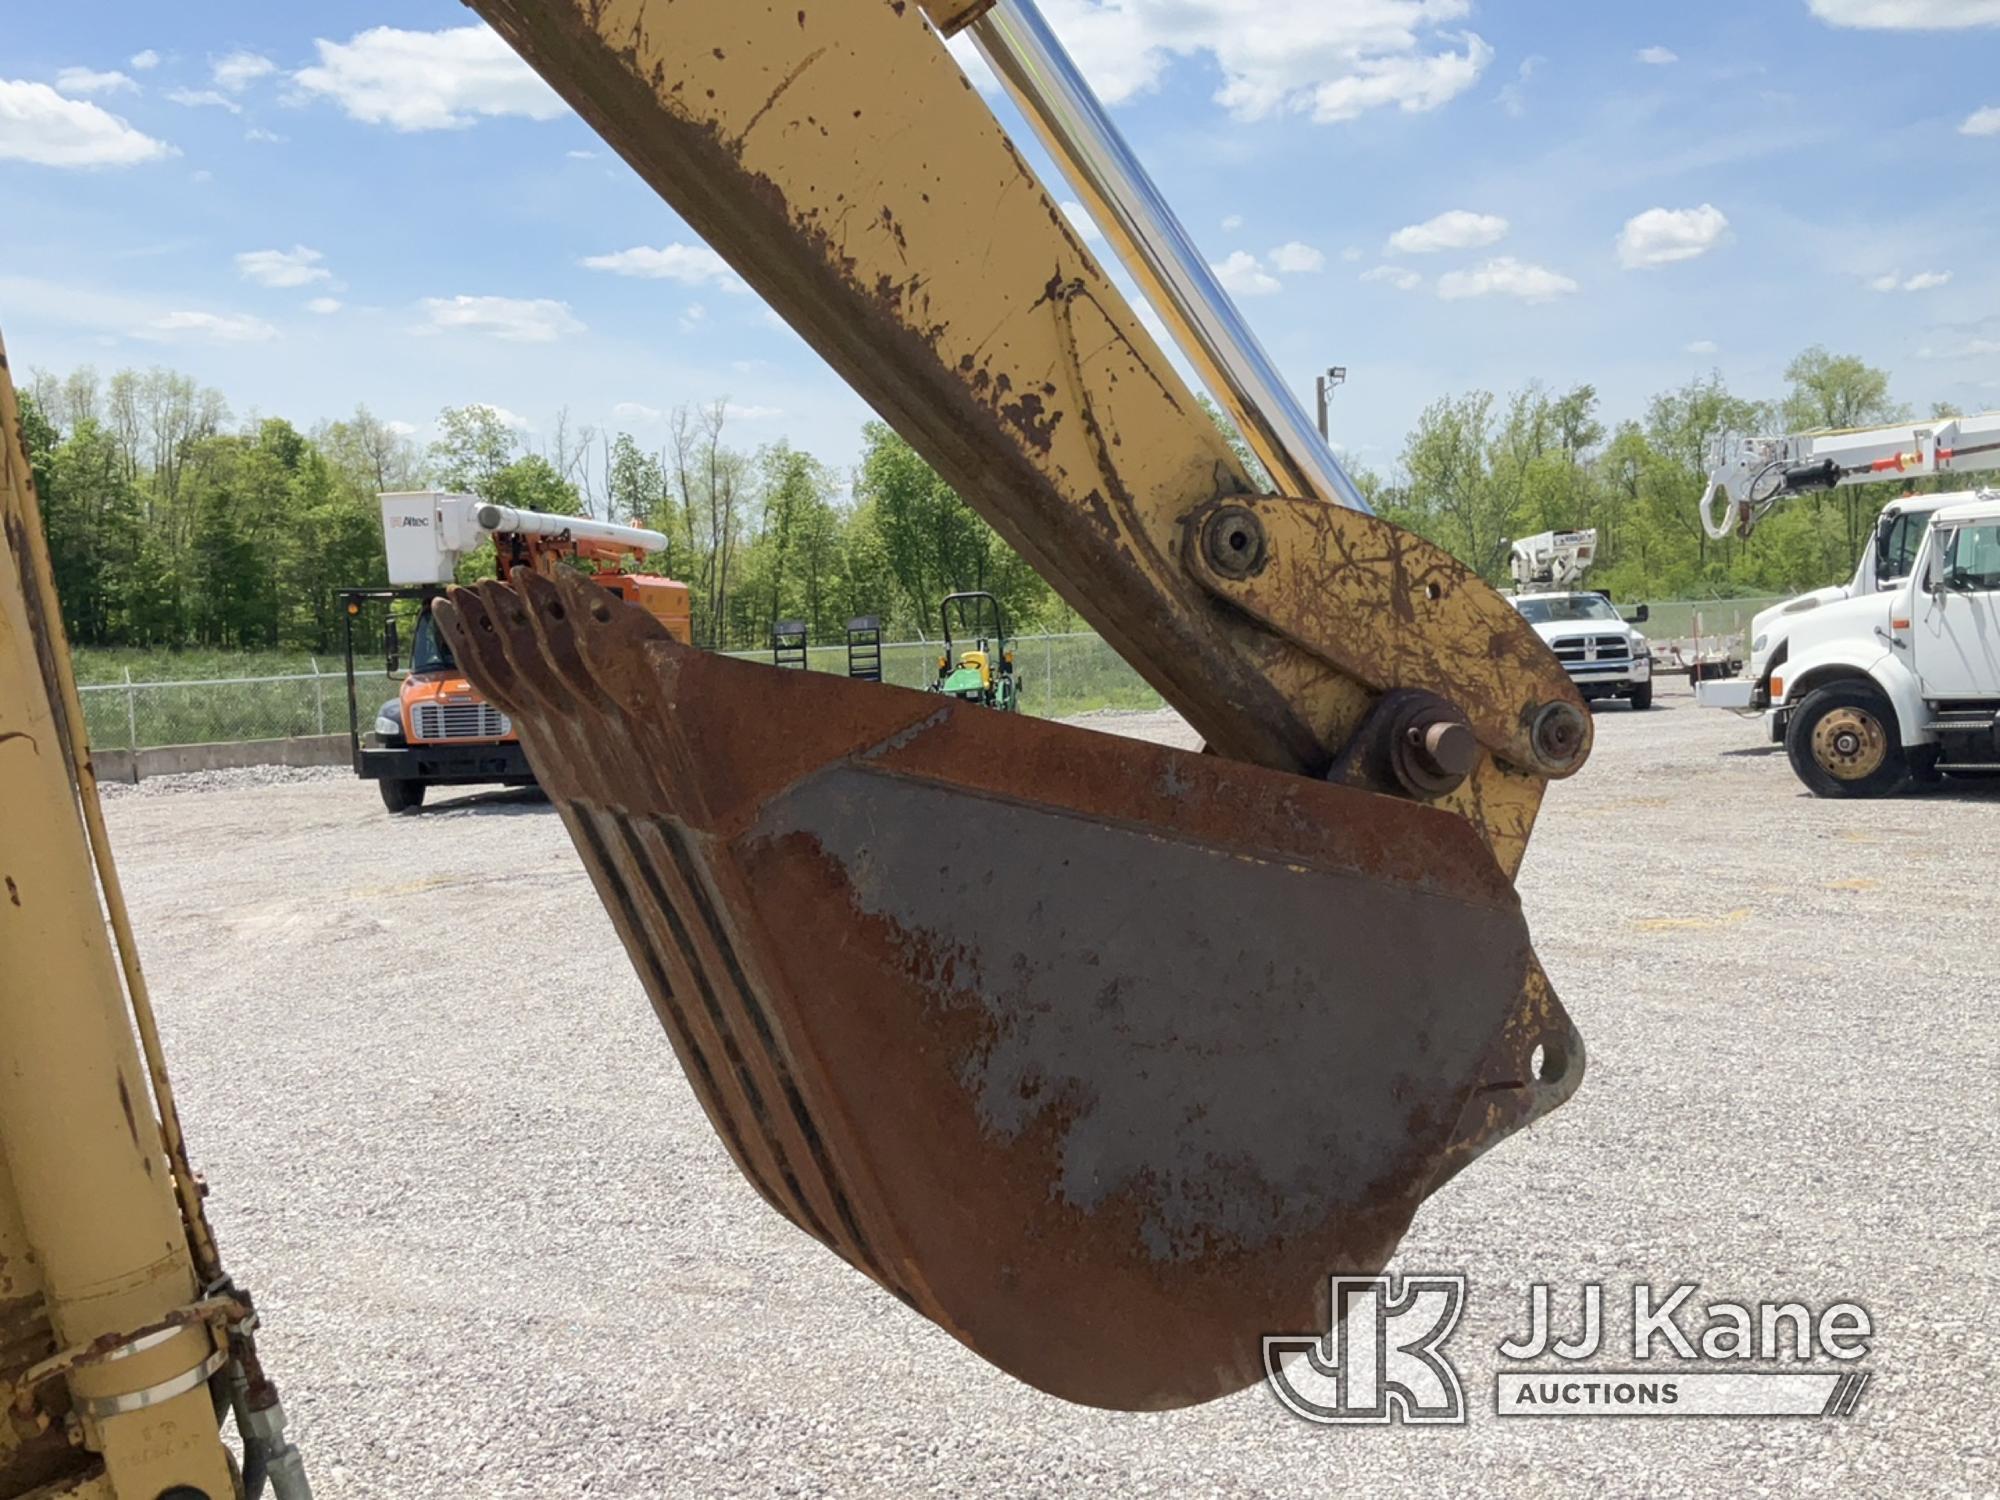 (Verona, KY) 1988 Cat 436 4X4 Tractor Loader Backhoe Runs, Moves & Operates) (Glass Broken Out, Rust